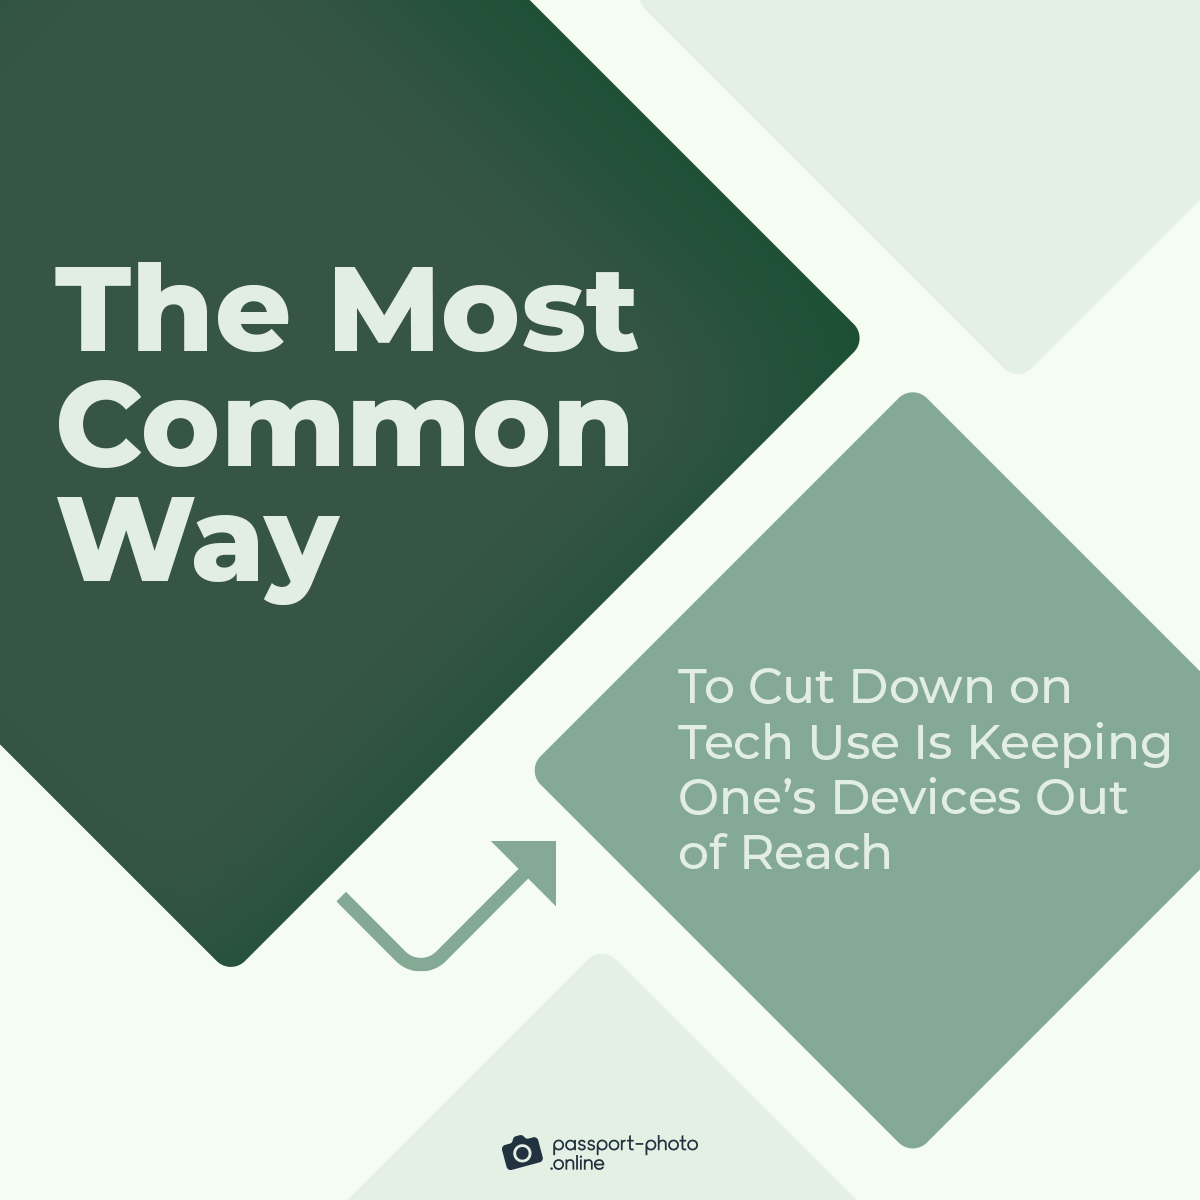 The most common way to cut down on tech use is keeping one’s devices out of reach: 23.5%